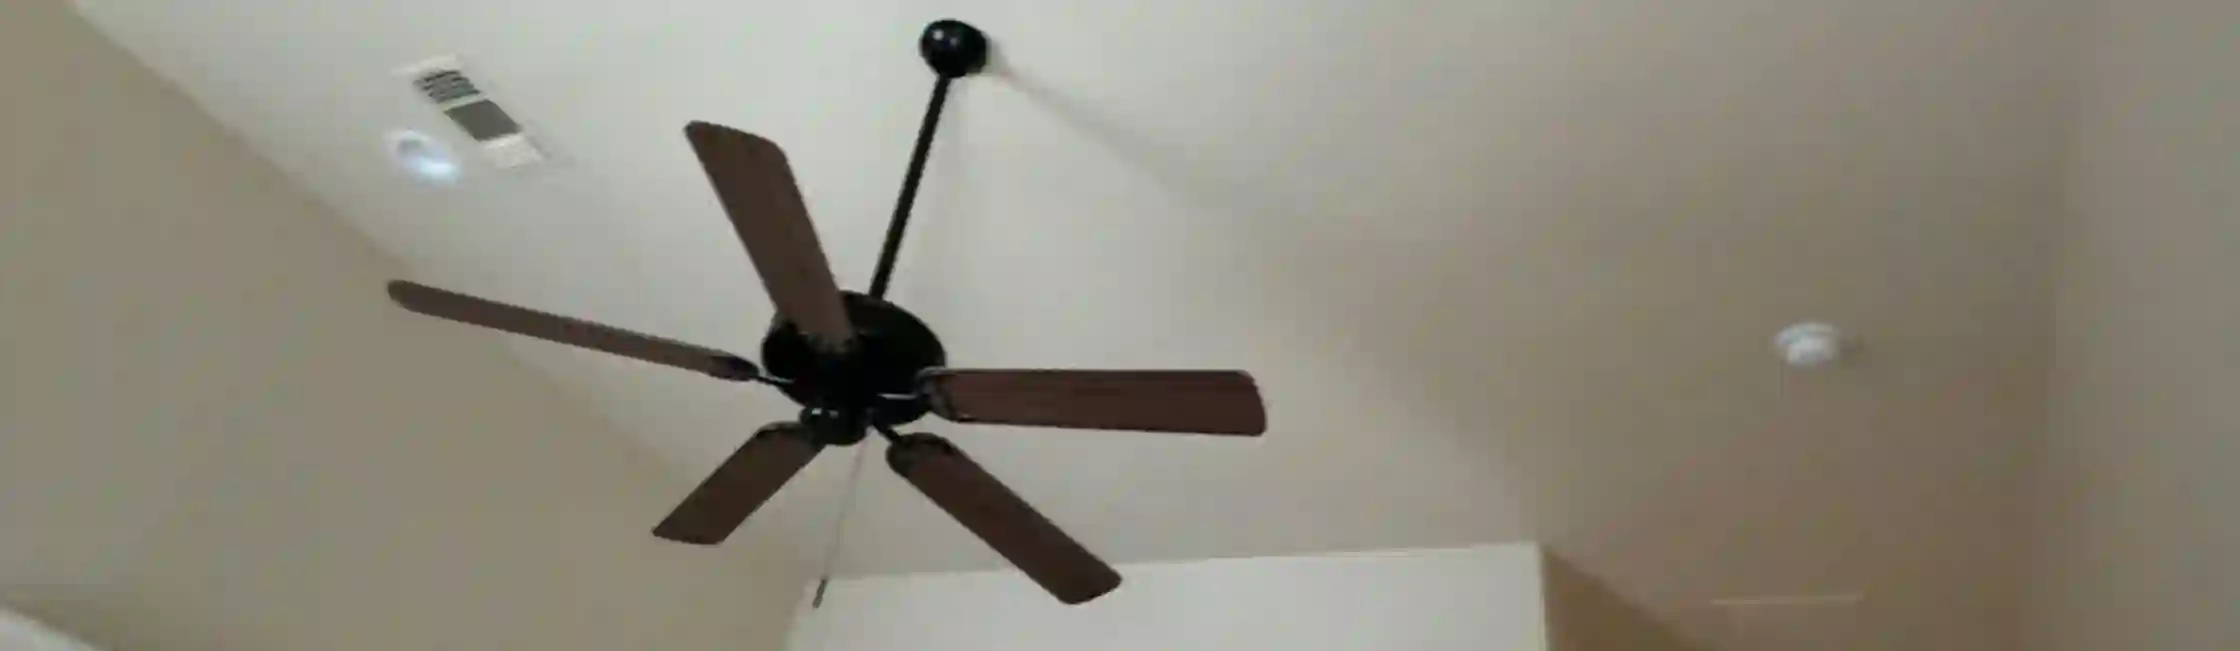 Ceiling fan installation with BLC Construction in Prosper Texas, 75078